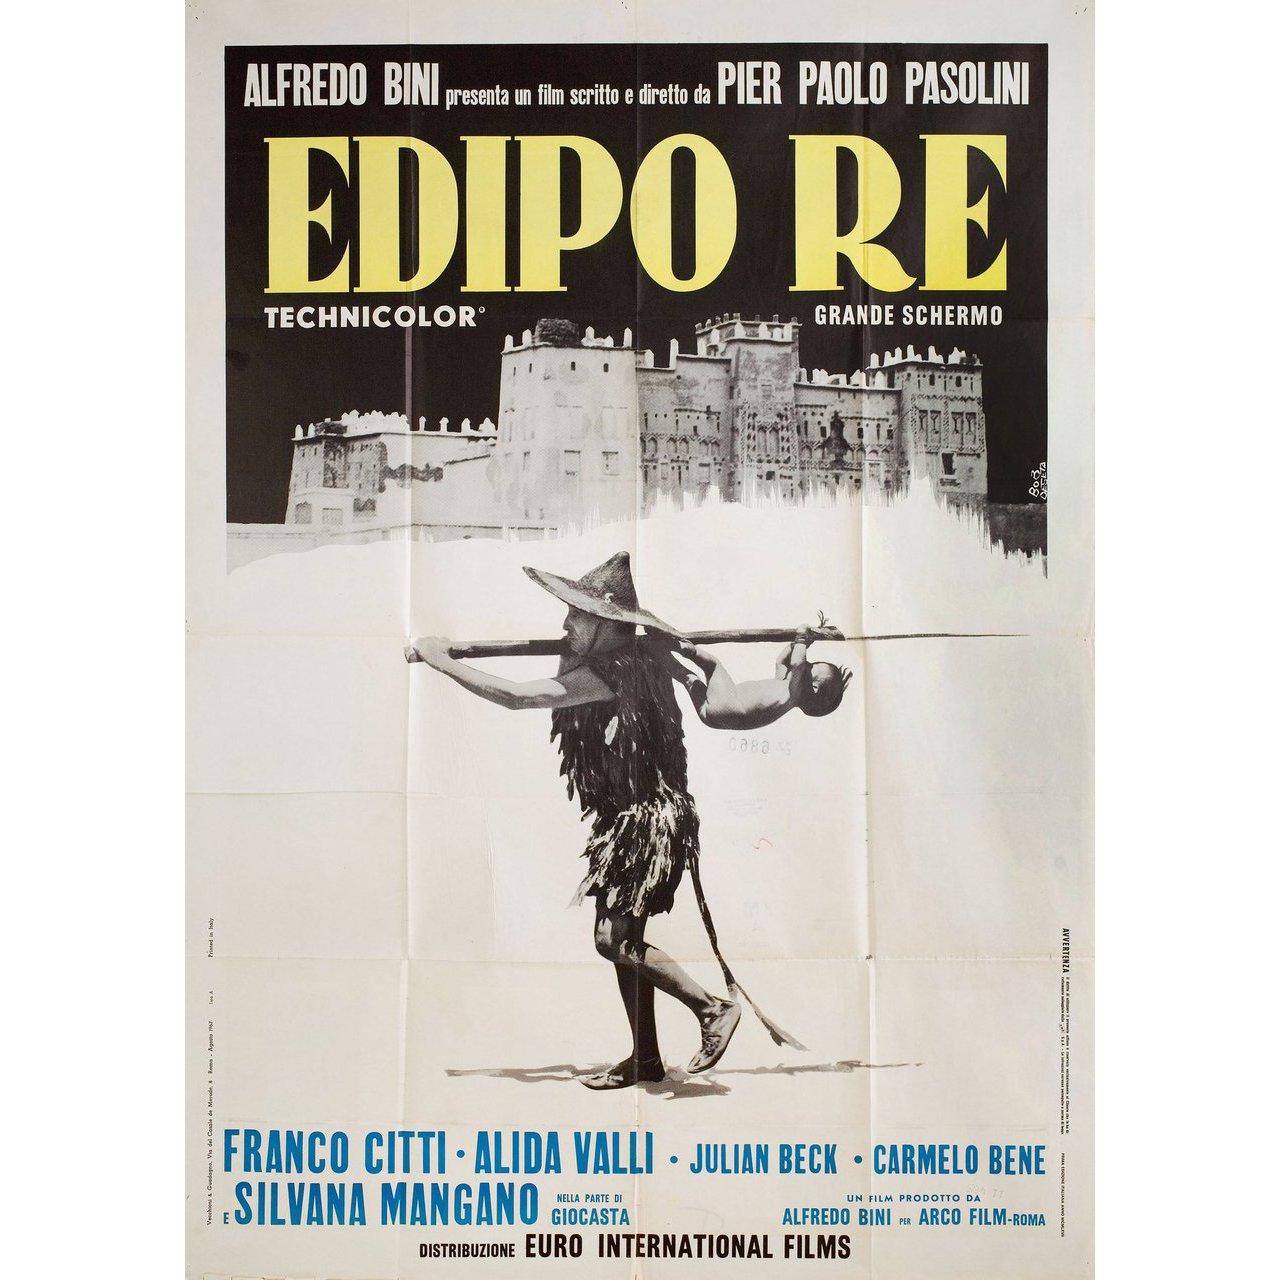 Original 1967 Italian due fogli poster for the film Oedipus Rex (Edipo re) directed by Pier Paolo Pasolini with Silvana Mangano / Franco Citti / Alida Valli / Carmelo Bene. Very good condition, folded. Many original posters were issued folded or